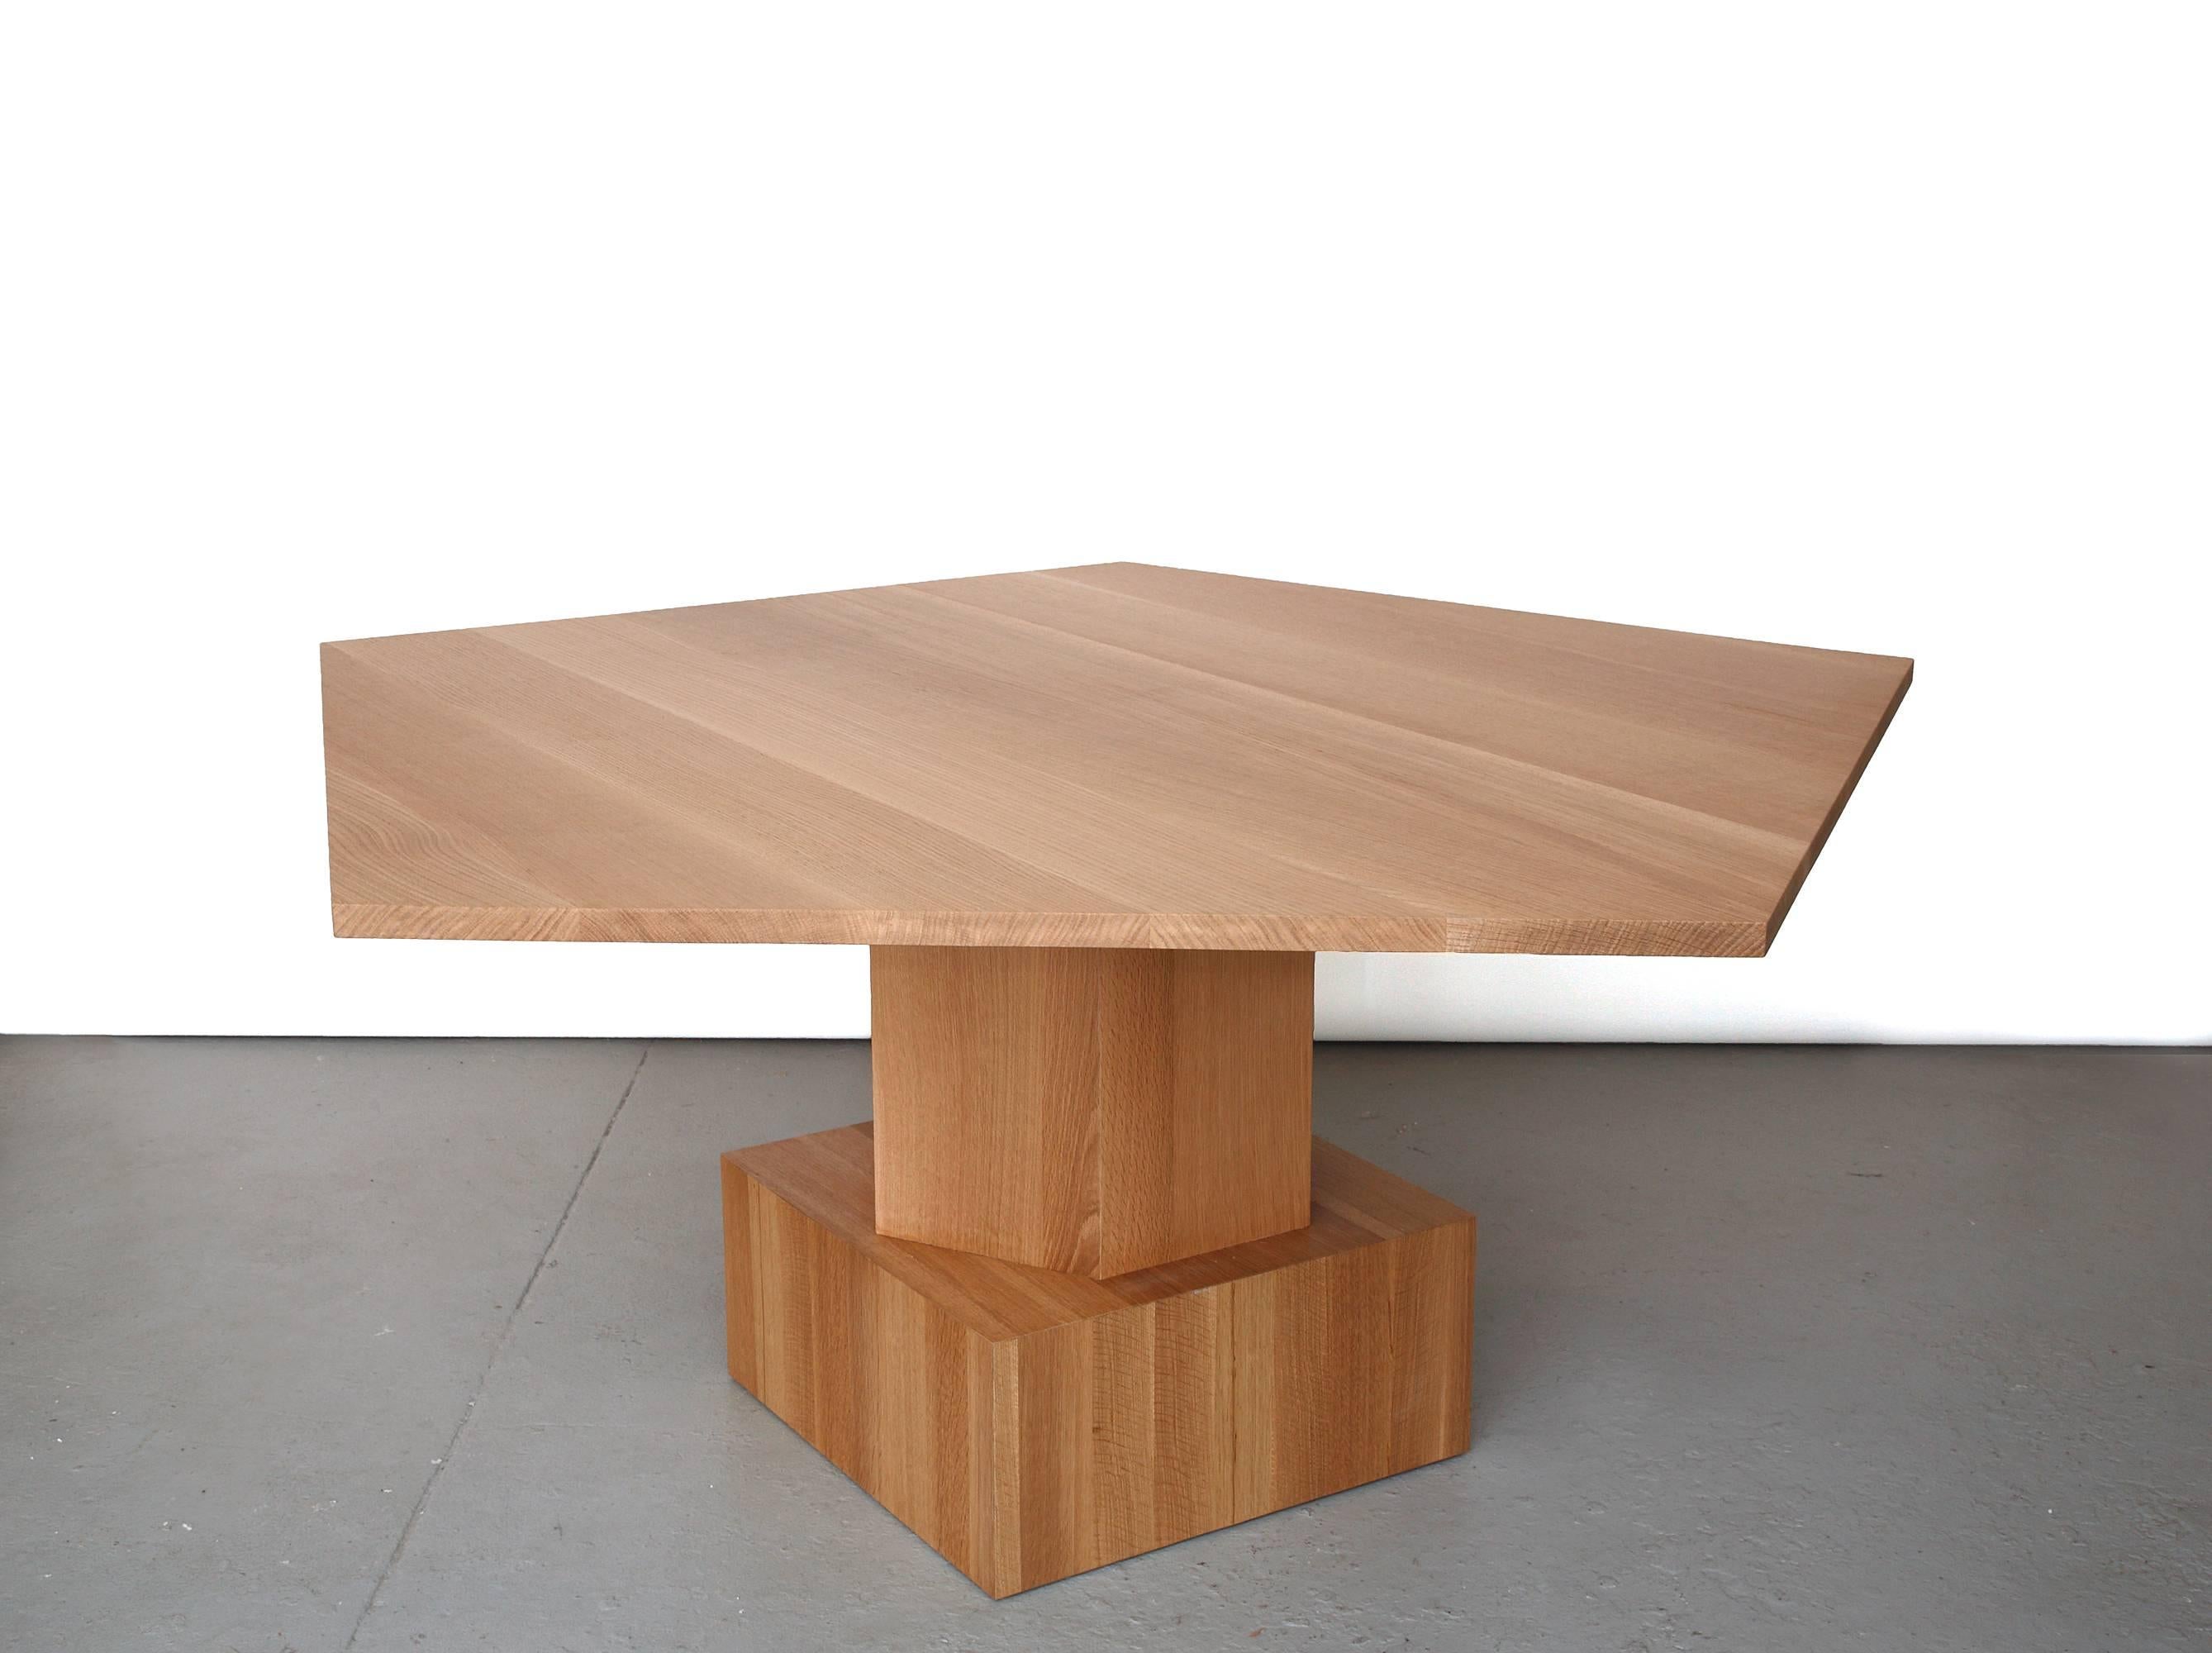 A stunning dining table by Tinatin Kilaberidze.
Tinatin Kilaberidze who works with geometric forms chose this pentagon shape for a dining table that can be used alone or as a pair to seat 10-12 people. This is also a wonderful center table.
Two of